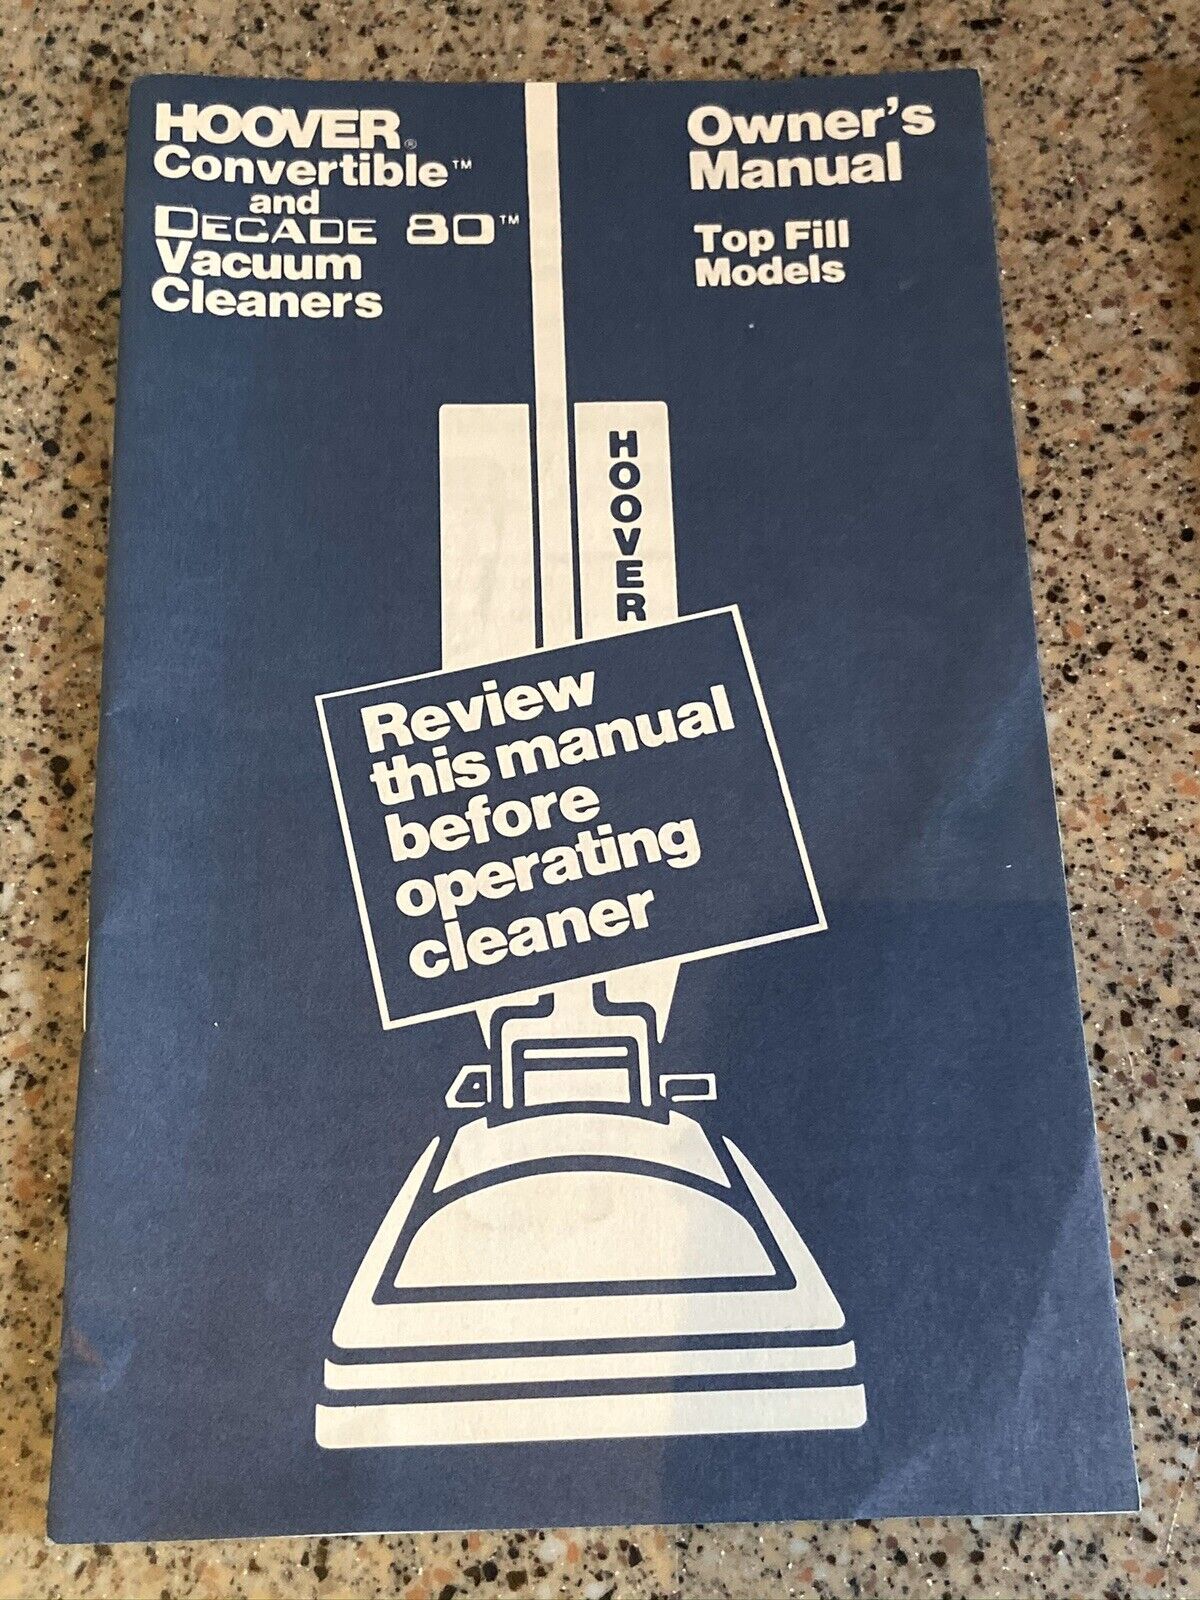 1980 Hoover Convertible And Decade 80 Vacuum Cleaner Owners Manual Top Full